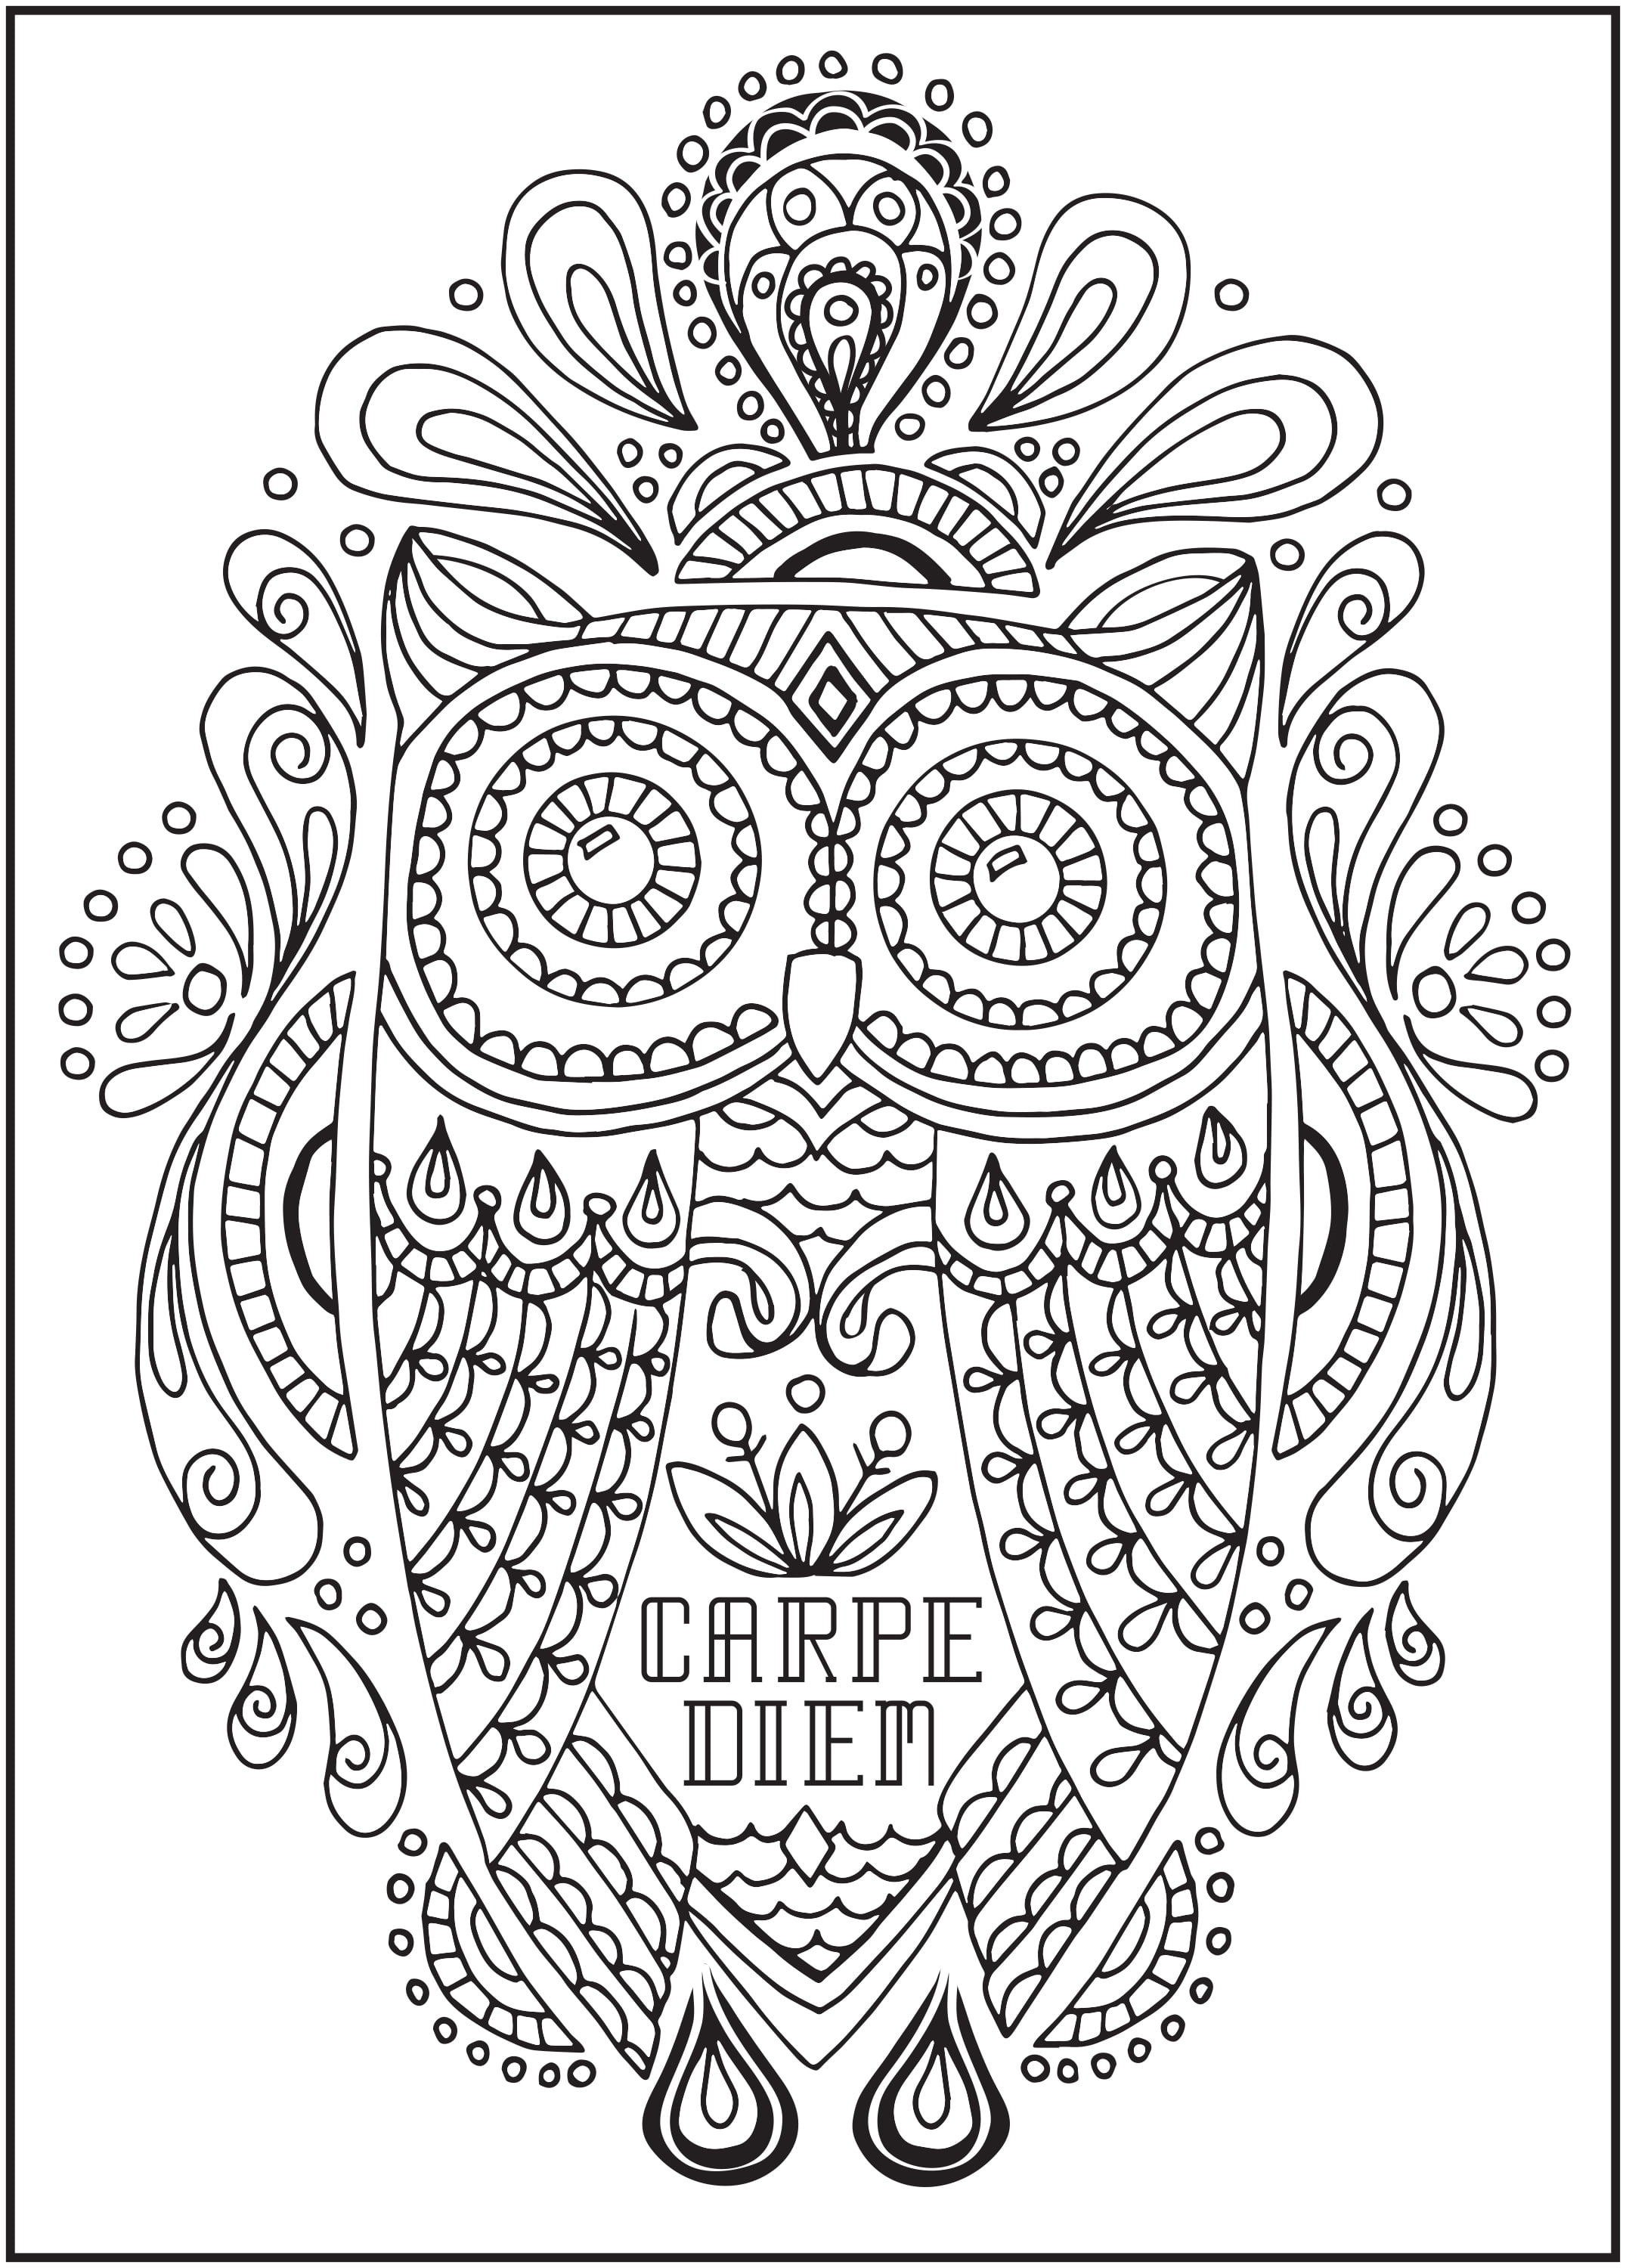 Cra-Z-Art Timeless Creations Adult Coloring Books: Creatures of Beauty  Creative Coloring Book (16278-6)